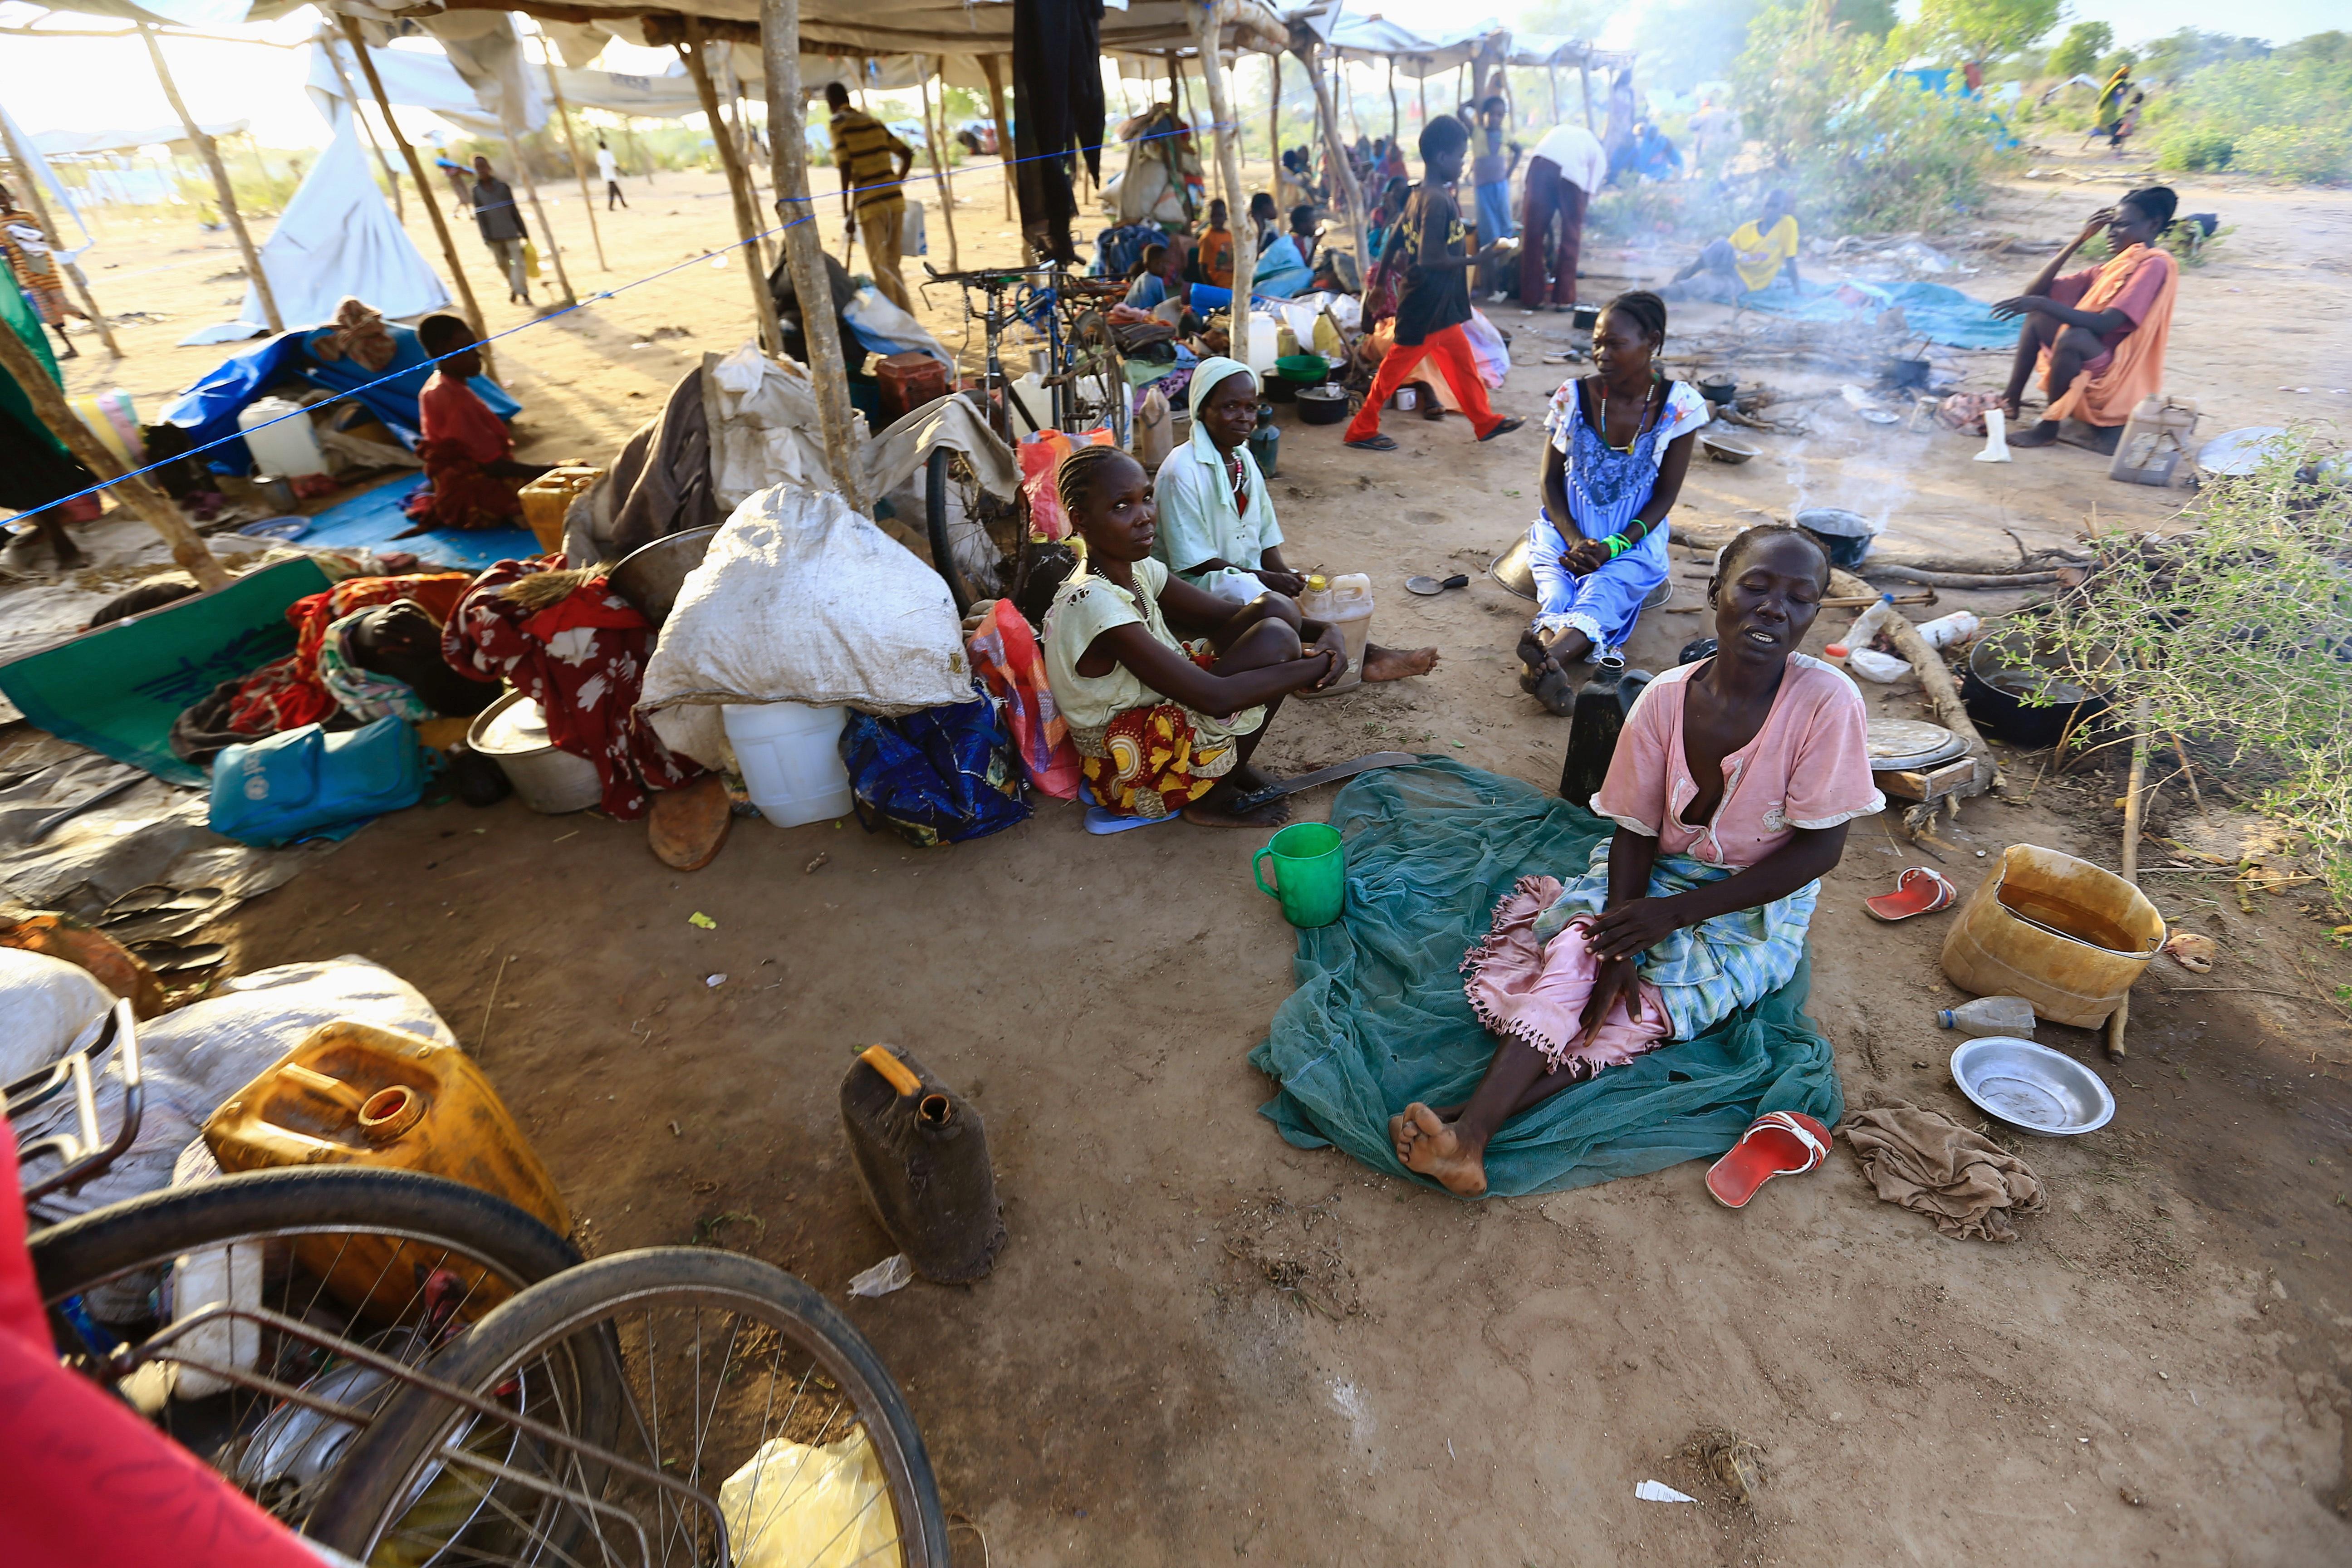 Video South Sudan civil war causes Africa’s worst refugee crisis